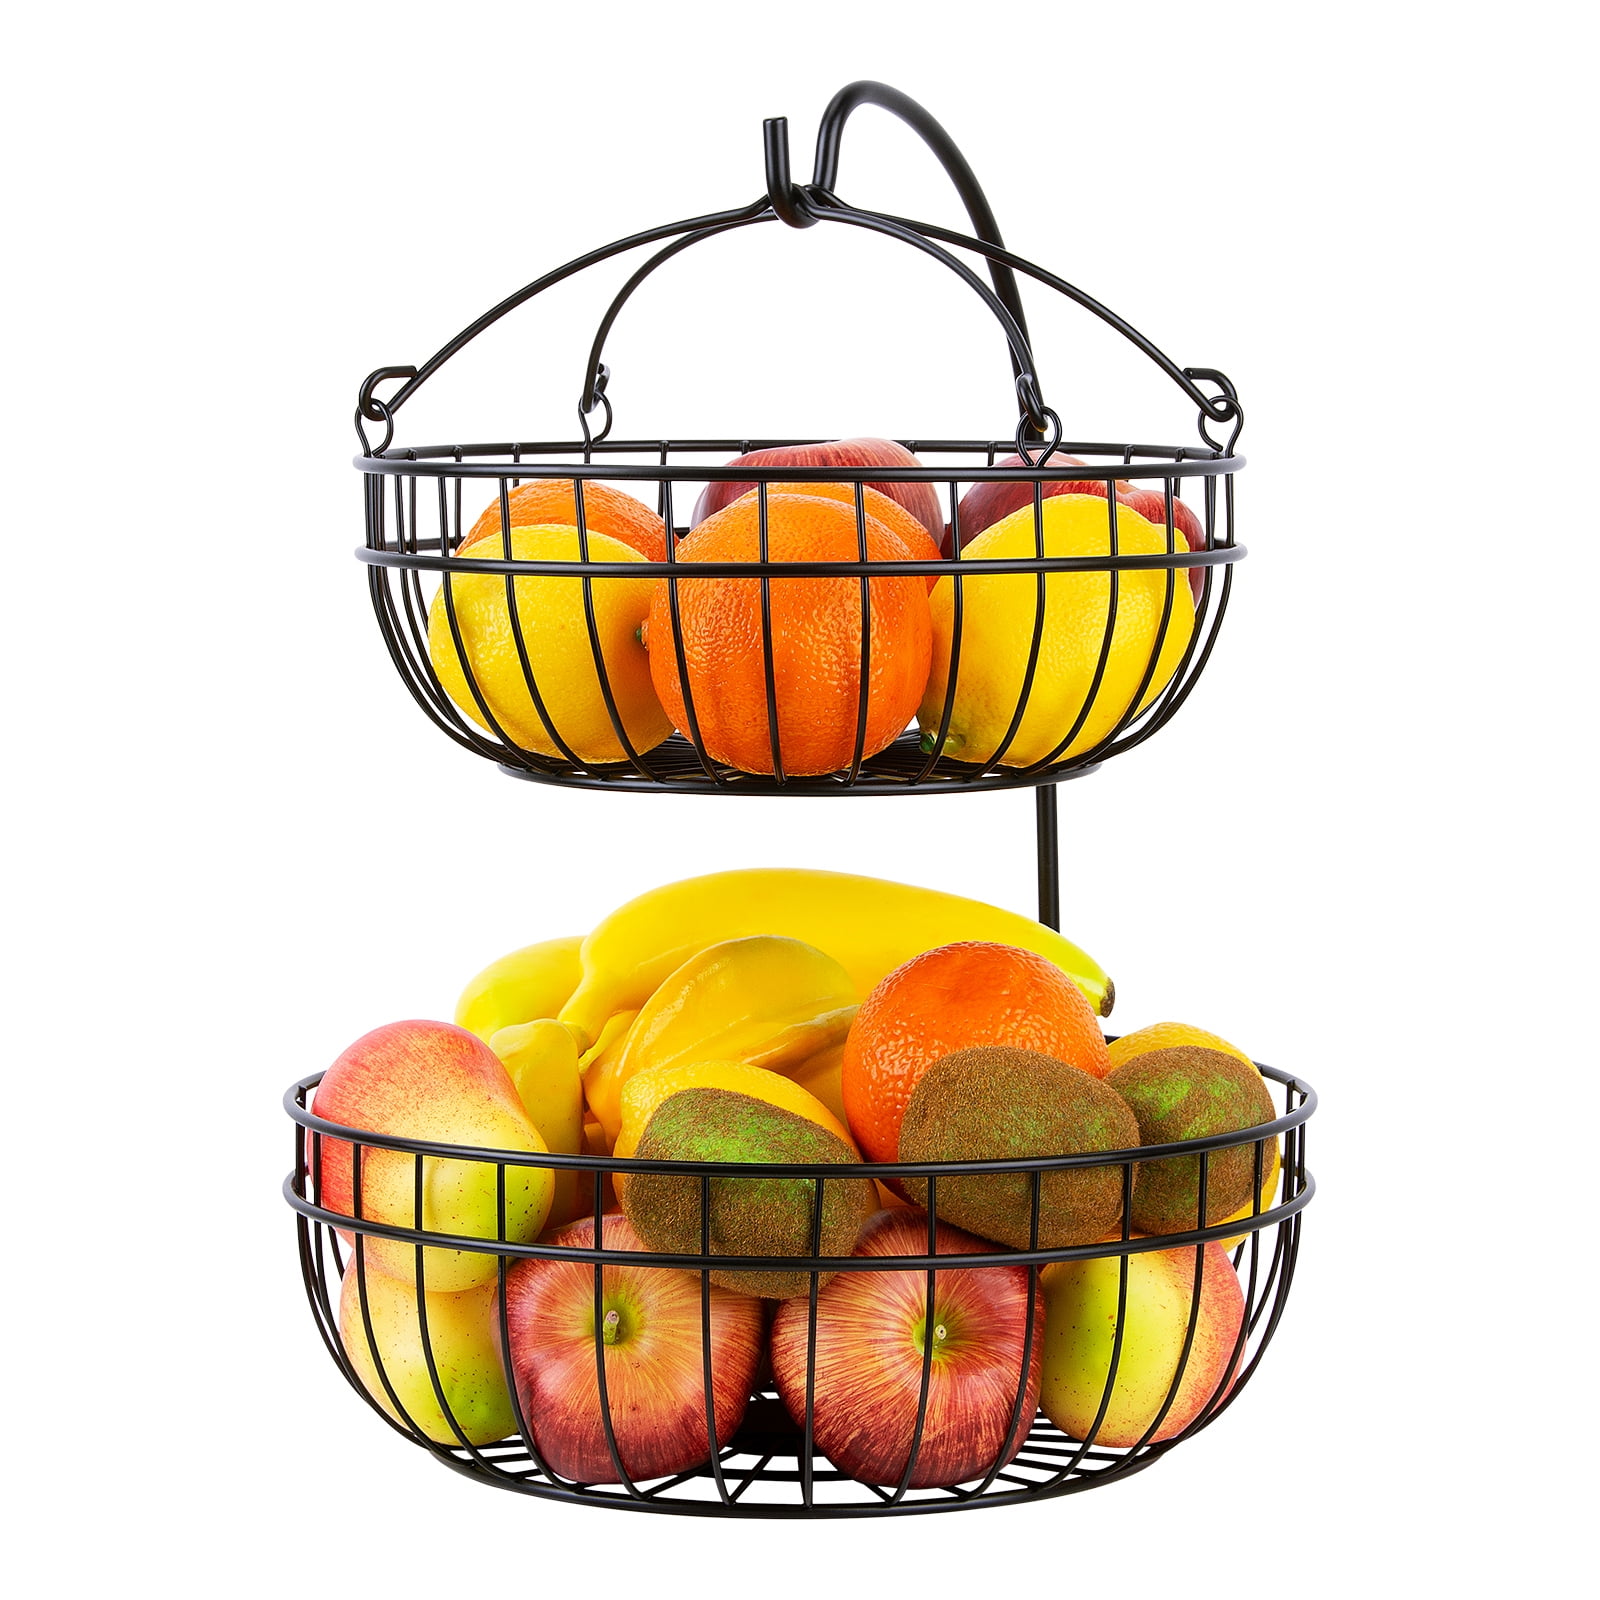 Mefirt Fruit Basket, Stackable Wall Mounted Fruit Baskets, Potato Basket  Onion Storage for Kitchen, Hanging Wire Basket with Wood Lid, 2-Tier